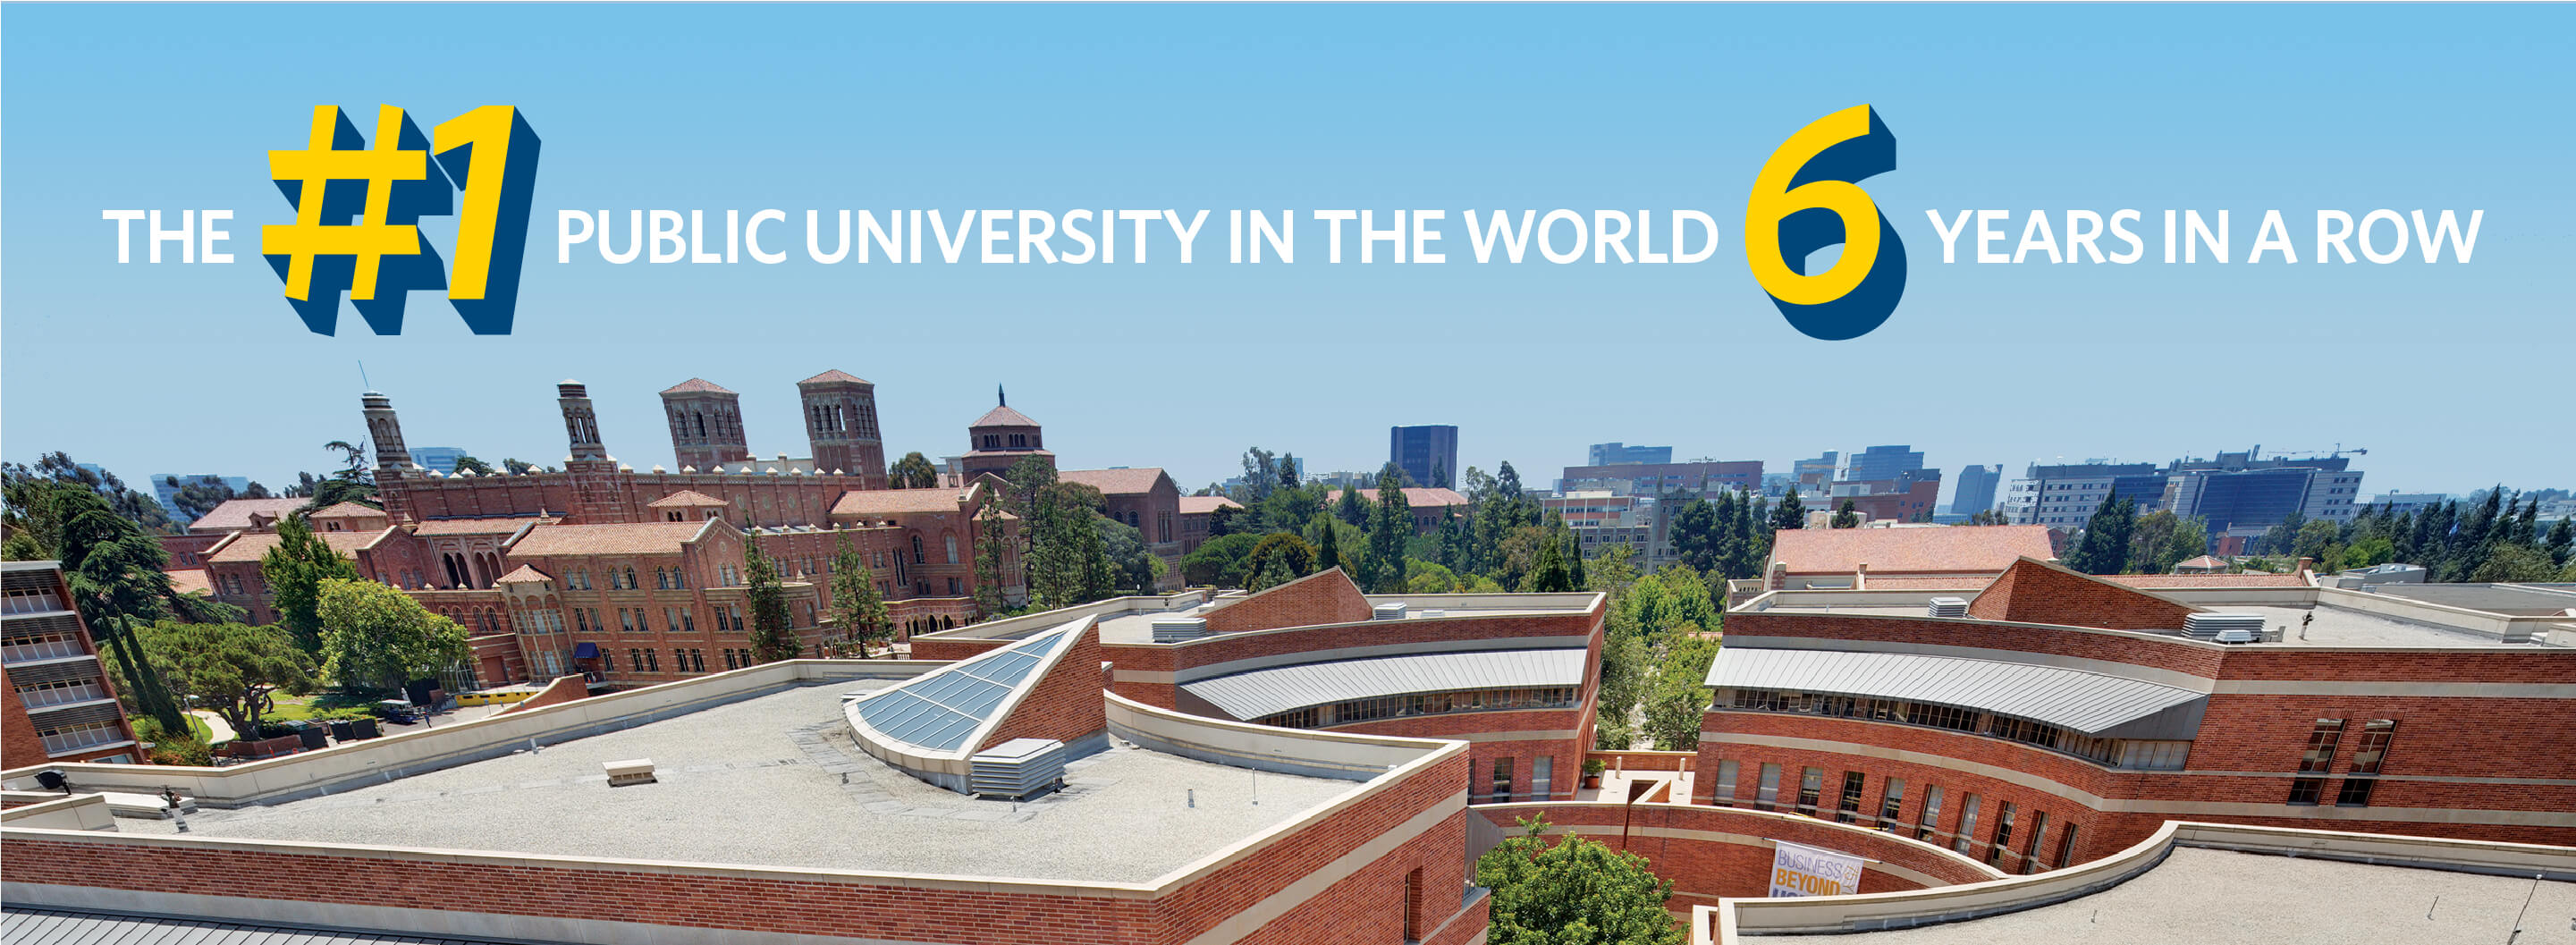 UCLA is the number 1 public university 6 years in a row